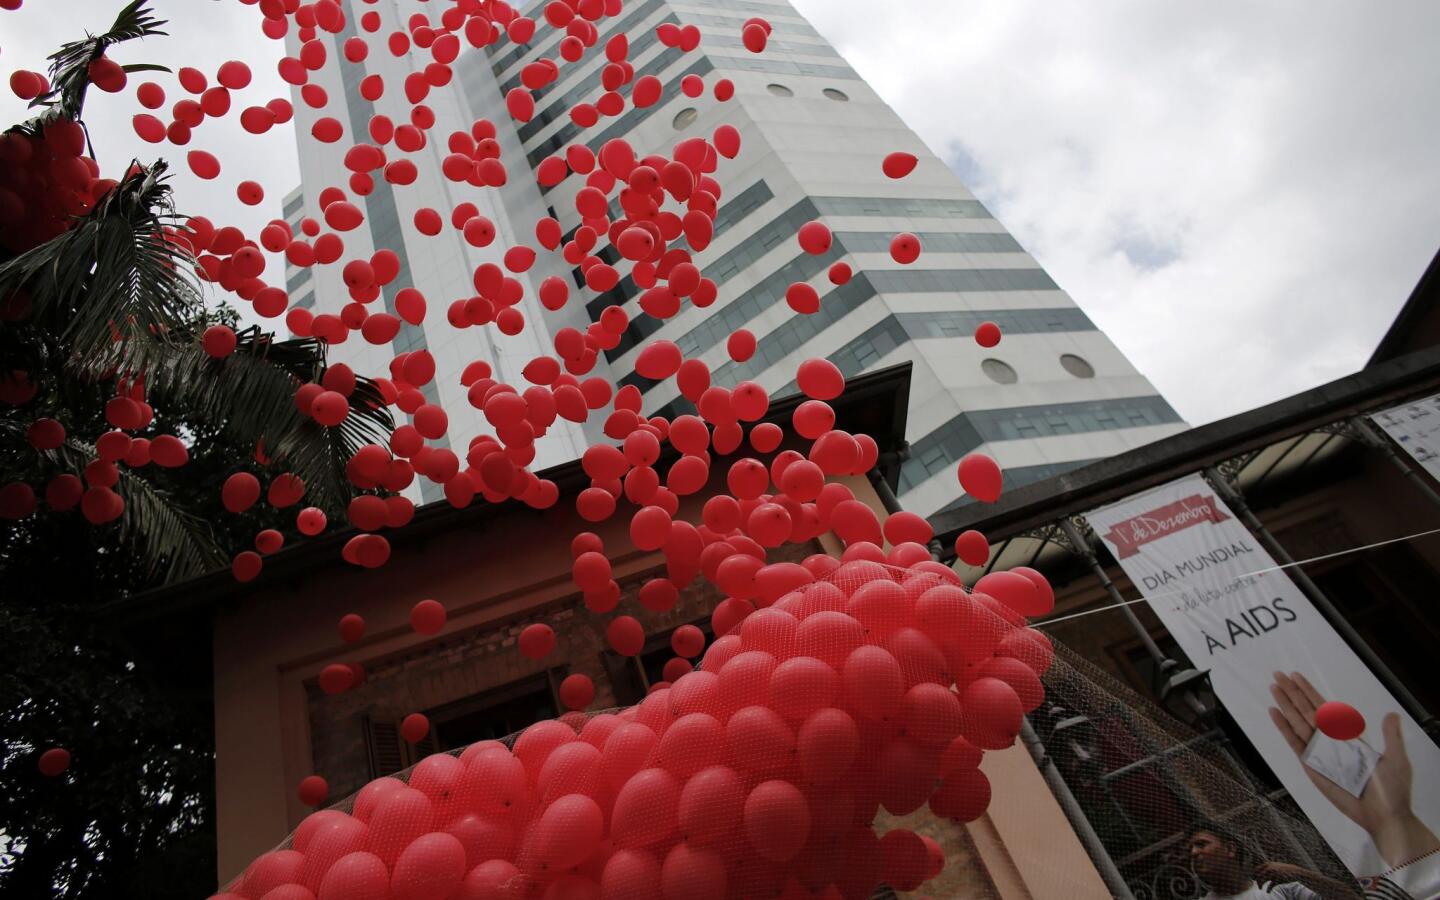 Red balloons are released to mark World Aids Day in Sao Paulo